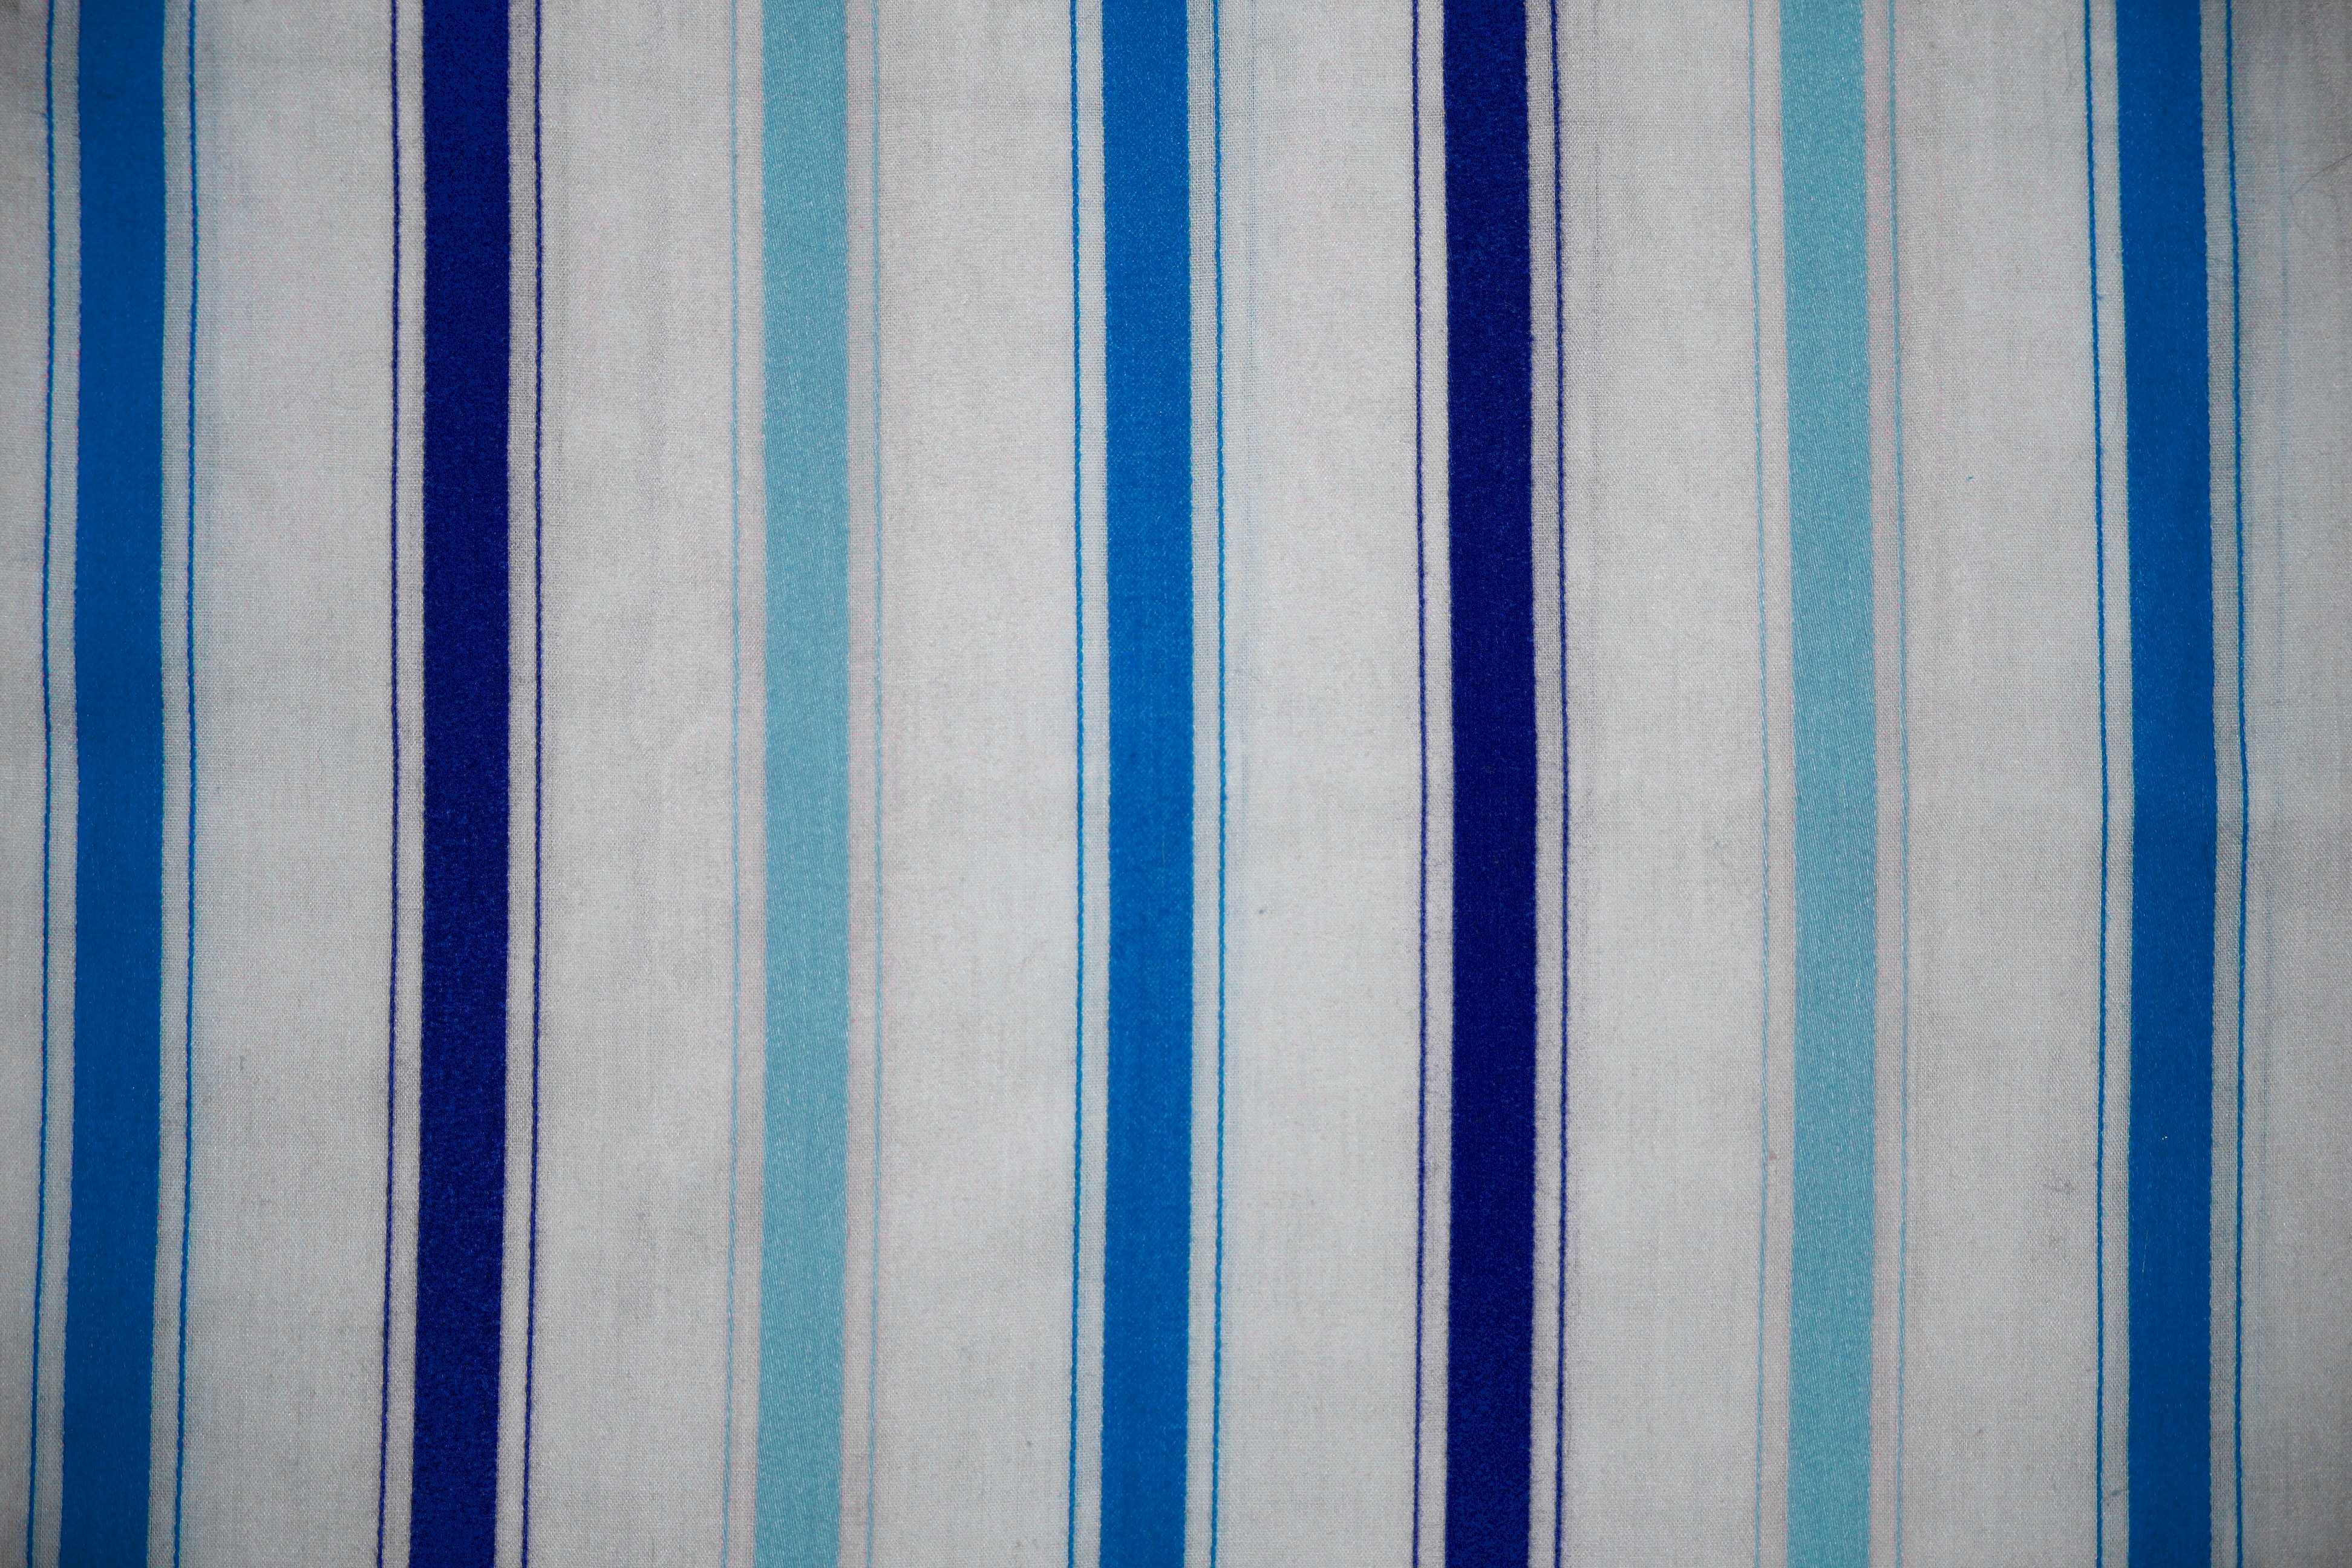 Striped Fabric Texture Blue On White Picture Free Photograph Photos